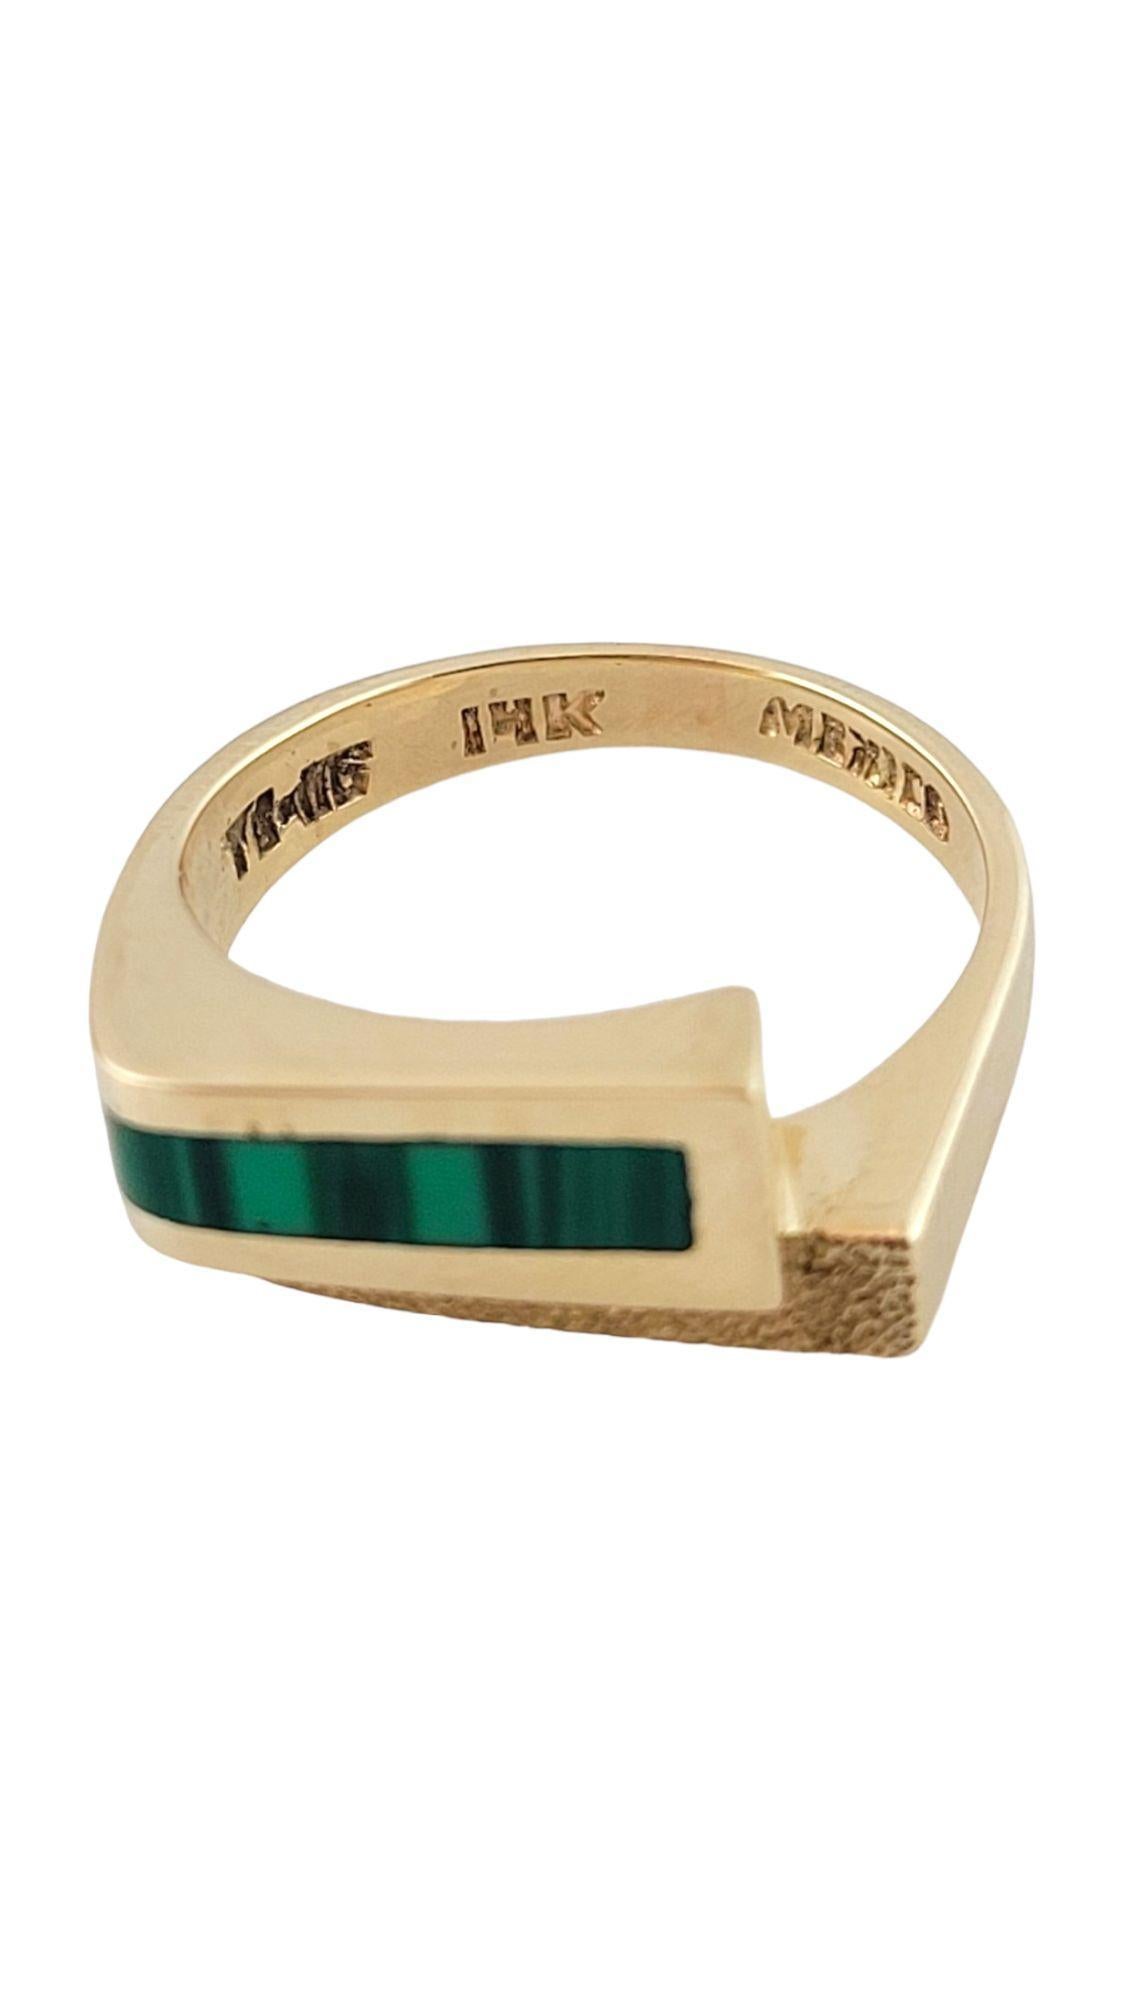 Vintage 14K Yellow Gold Malachite Taxco Ring Size 6.75

This gorgeous inlaid malachite Taxco ring is crafted from 14K yellow gold!

Ring size: 6.75
Shank: 2.8mm
Front: 8.0mm X 17.1mm X 3.5mm

Weight: 6.31 g/ 4.1 dwt

Hallmark: T8-116 14K